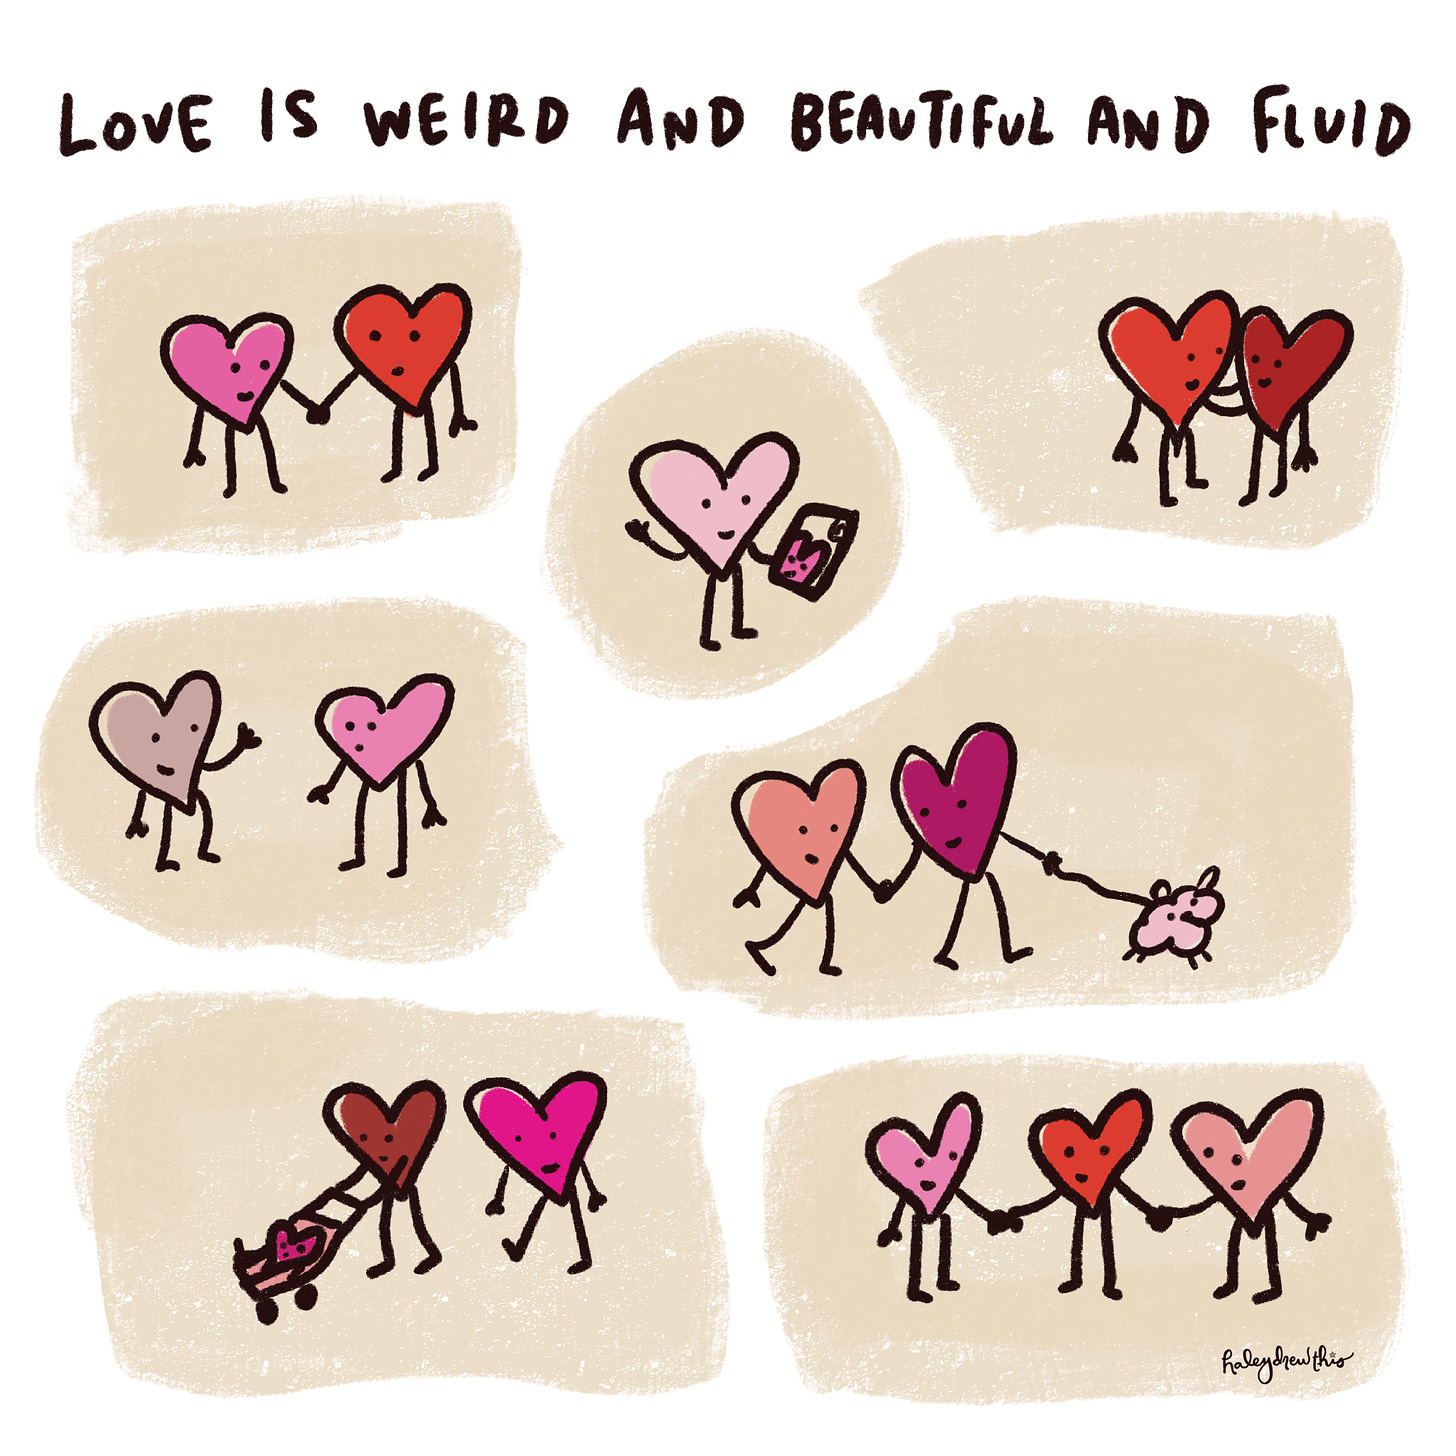 Love is weird and beautiful and fluid